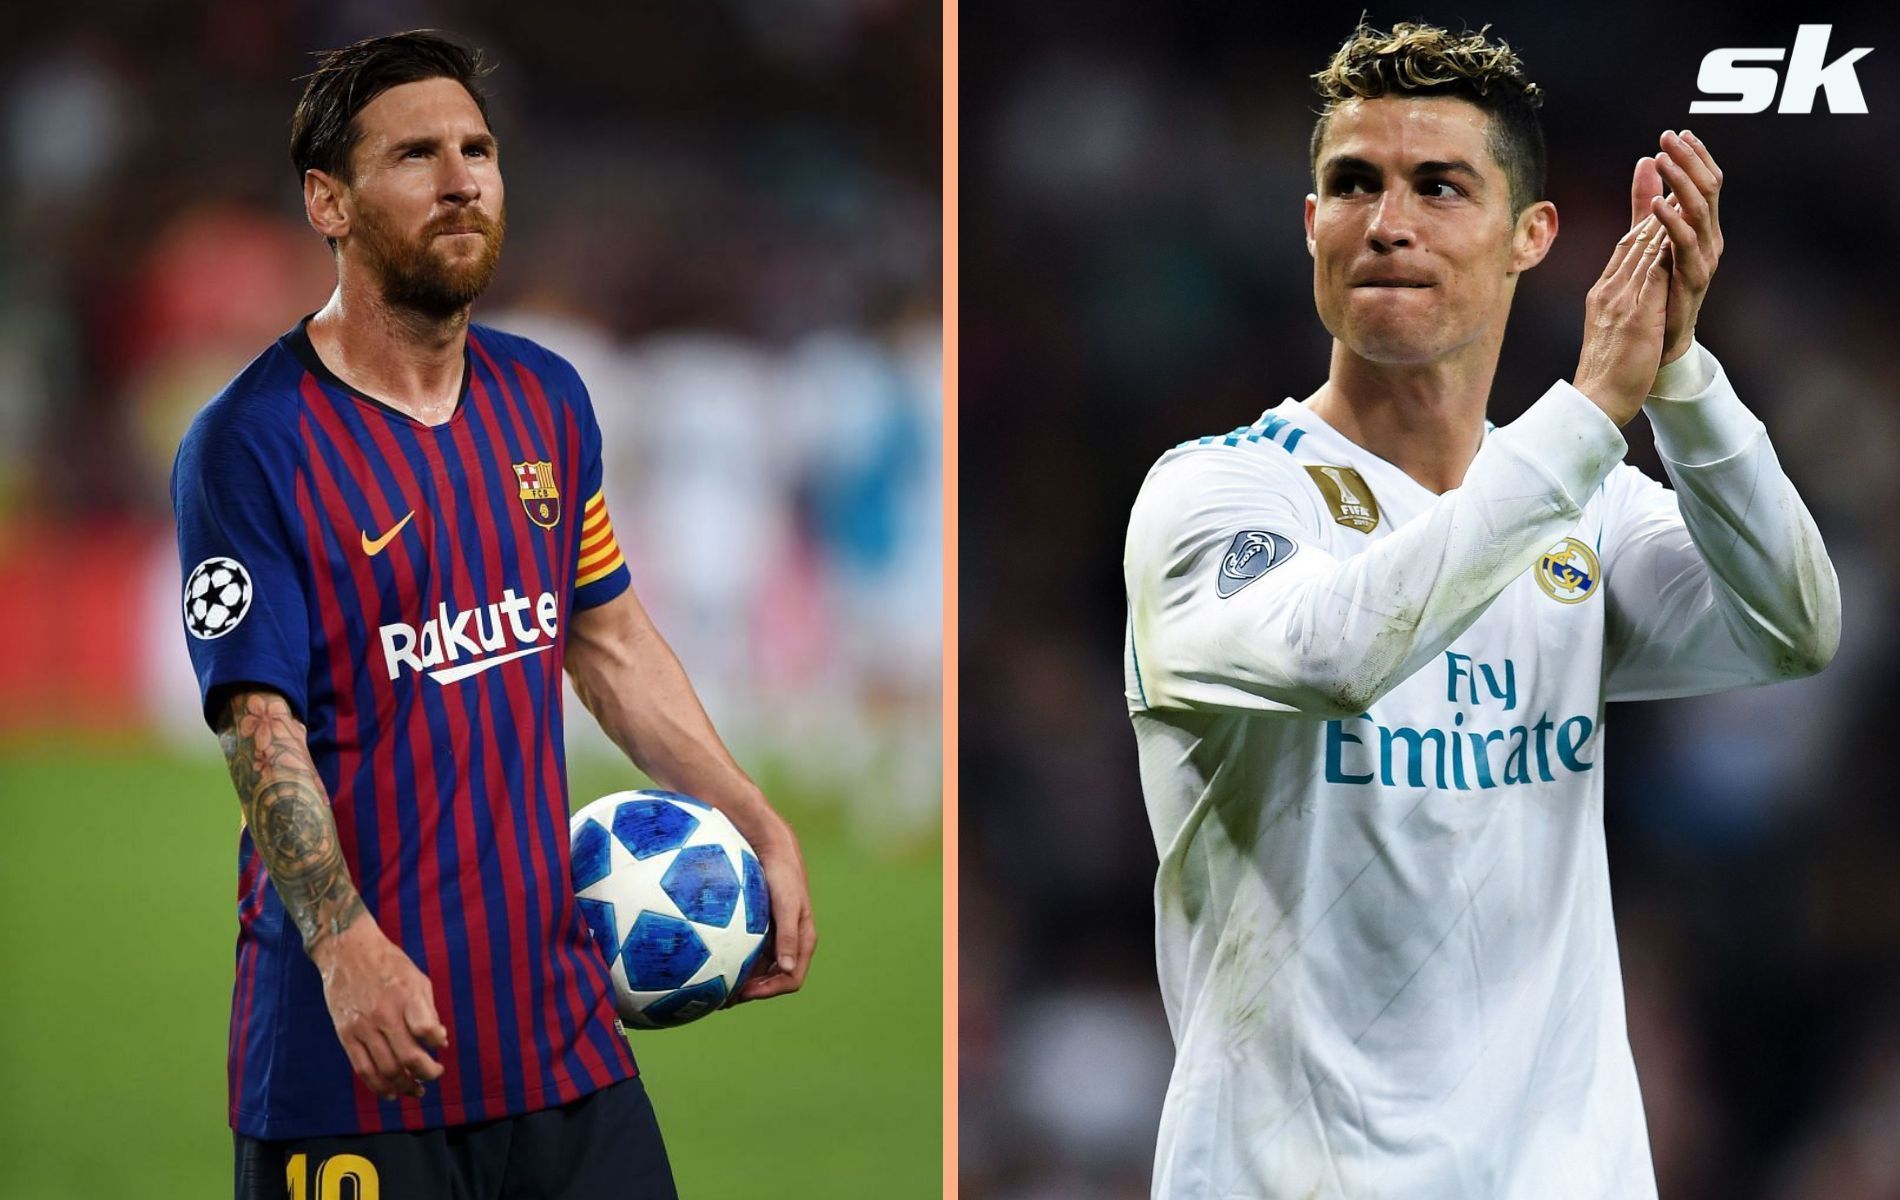 Cristiano Ronaldo and Lionel Messi have fed off this rivalry to bring out the best in them